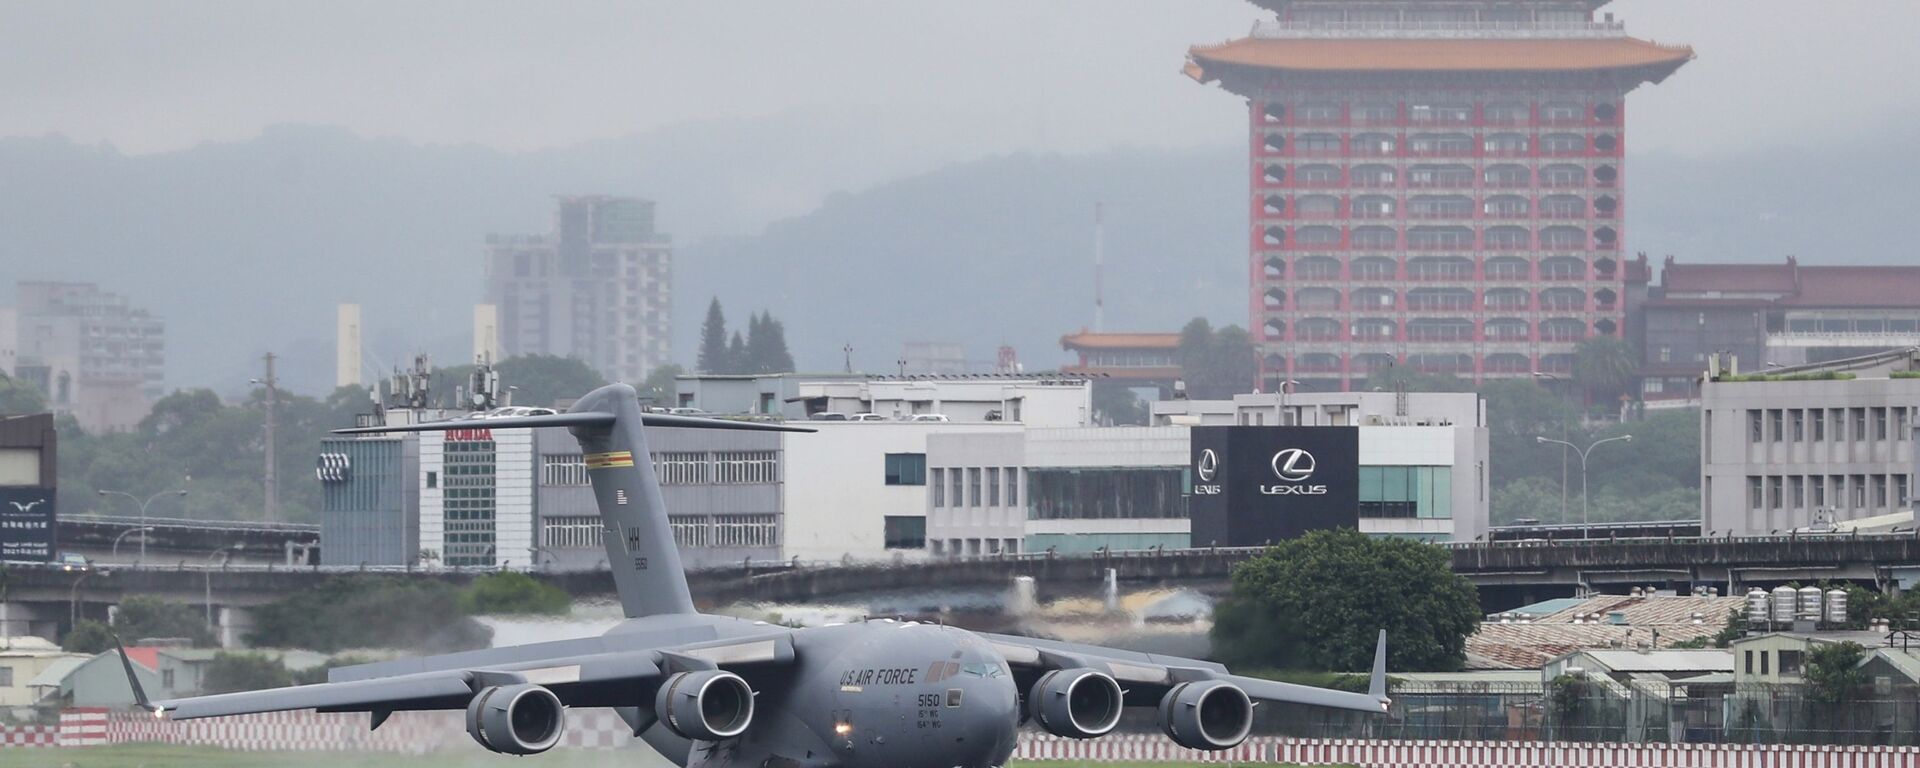 A U.S. military aircraft carrying a group of U.S. senators arrives at the Songshan Airport in Taipei, Taiwan on Sunday, June 6, 2021 - Sputnik International, 1920, 07.09.2021